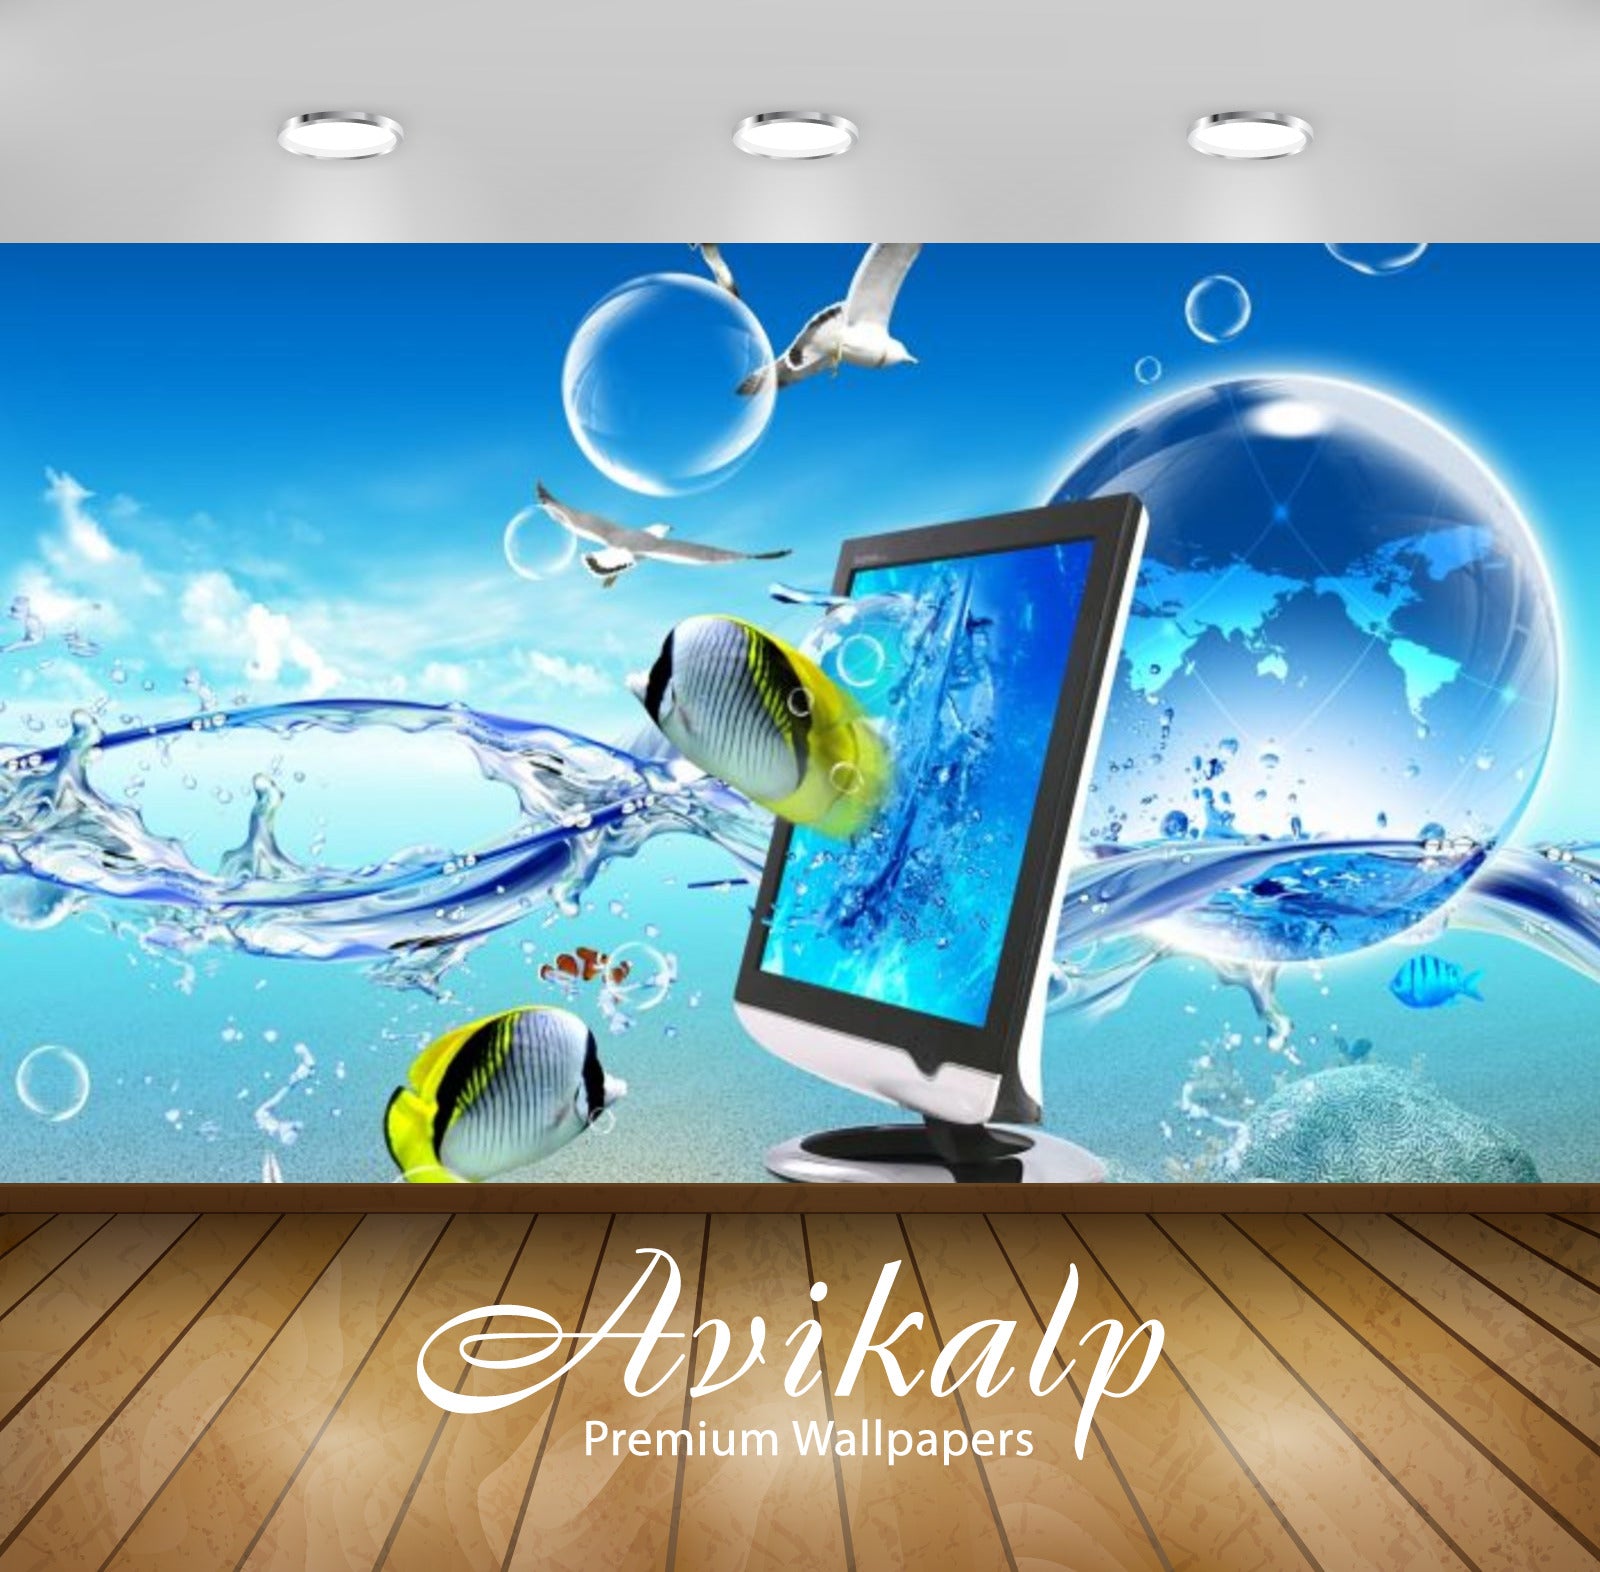 Avikalp Exclusive Awi2623 Fish Full HD Wallpapers for Living room, Hall, Kids Room, Kitchen, TV Back